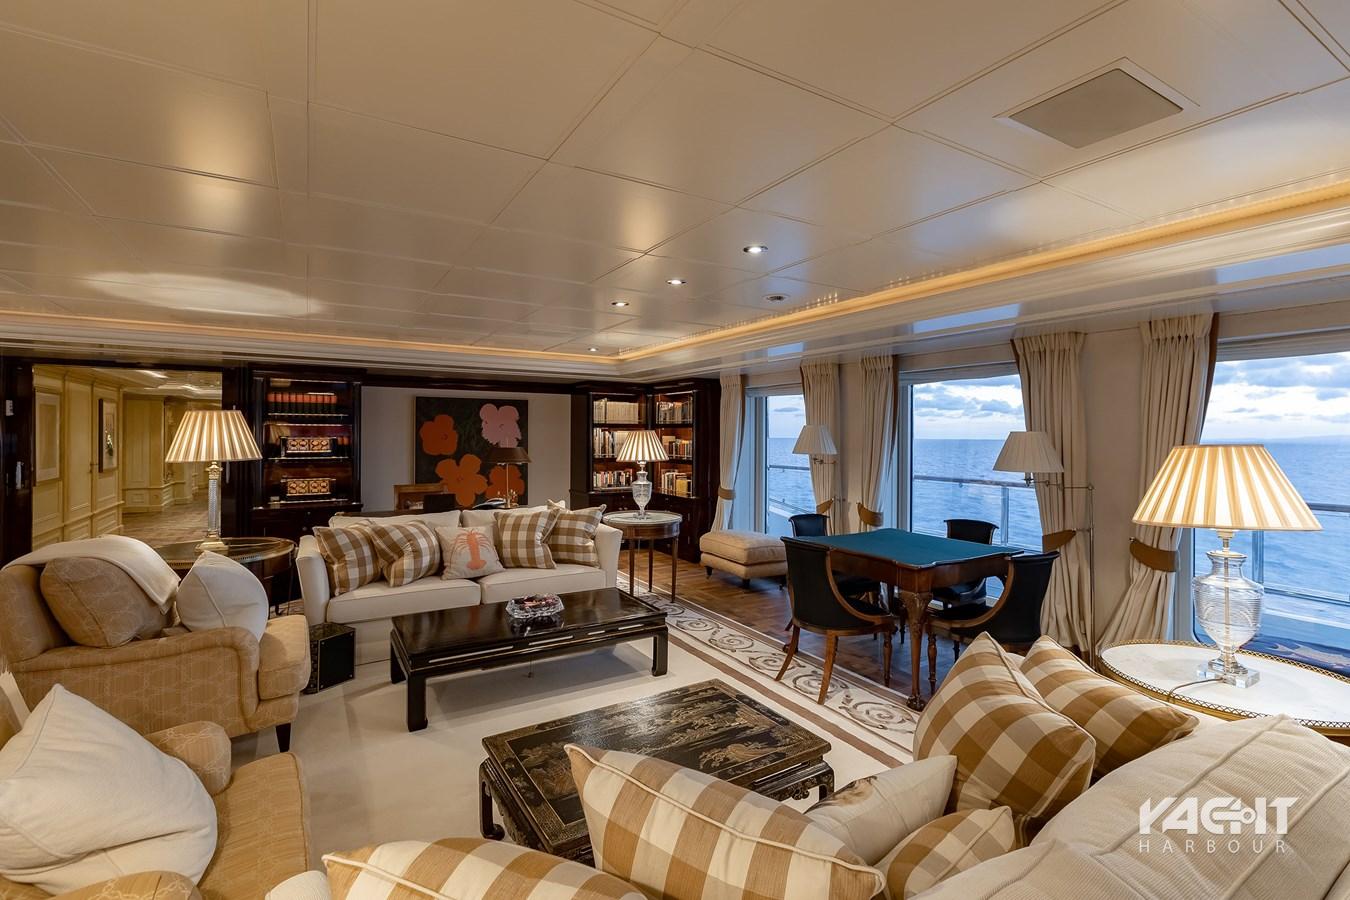 97m Lürssen’s Carinthia VII Finds New Owner